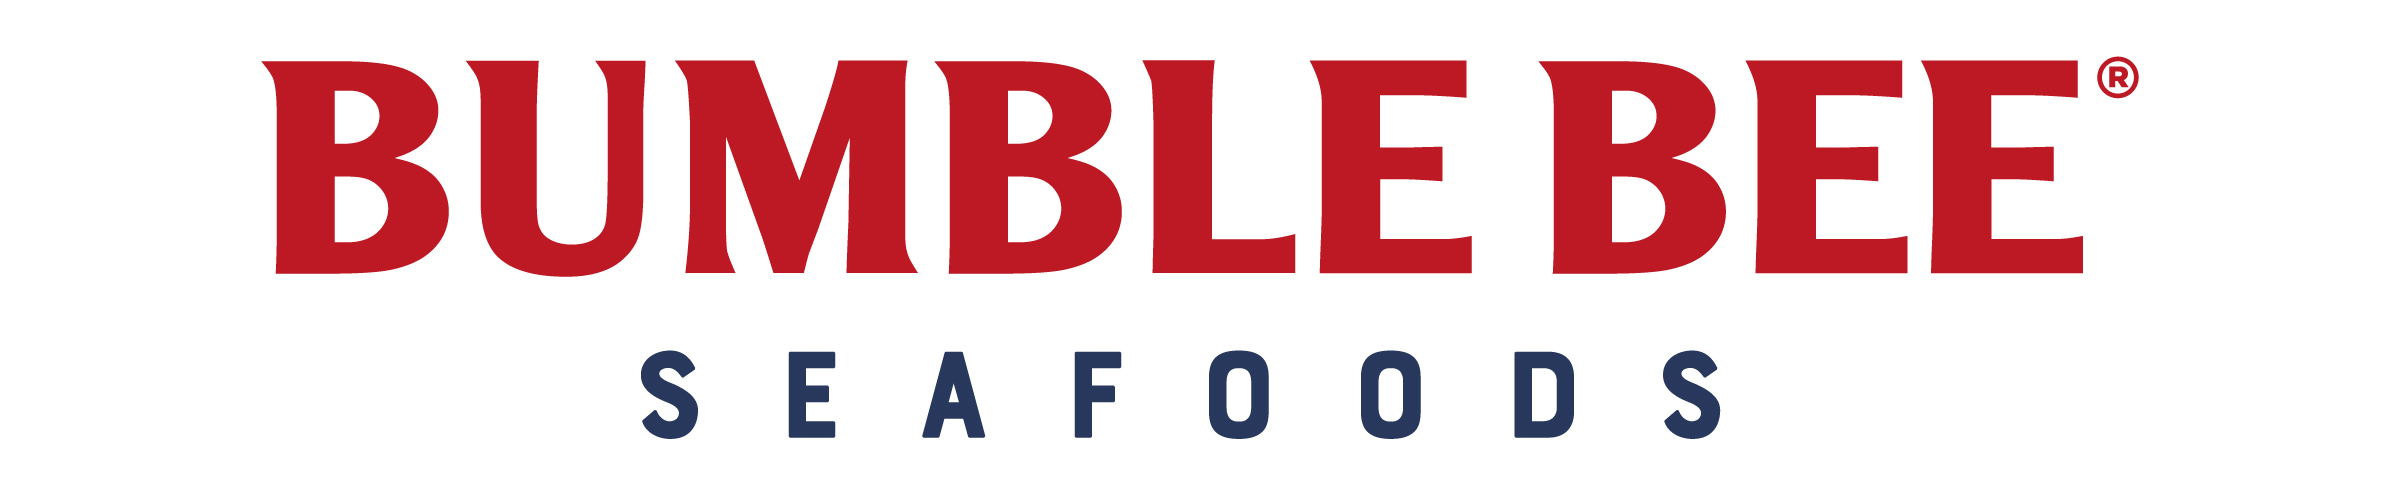 Bumble Bee Foods Announces Joint Distribution Venture with Pioneering Plant-Based Seafood Brand Good Catch® | Business Wire